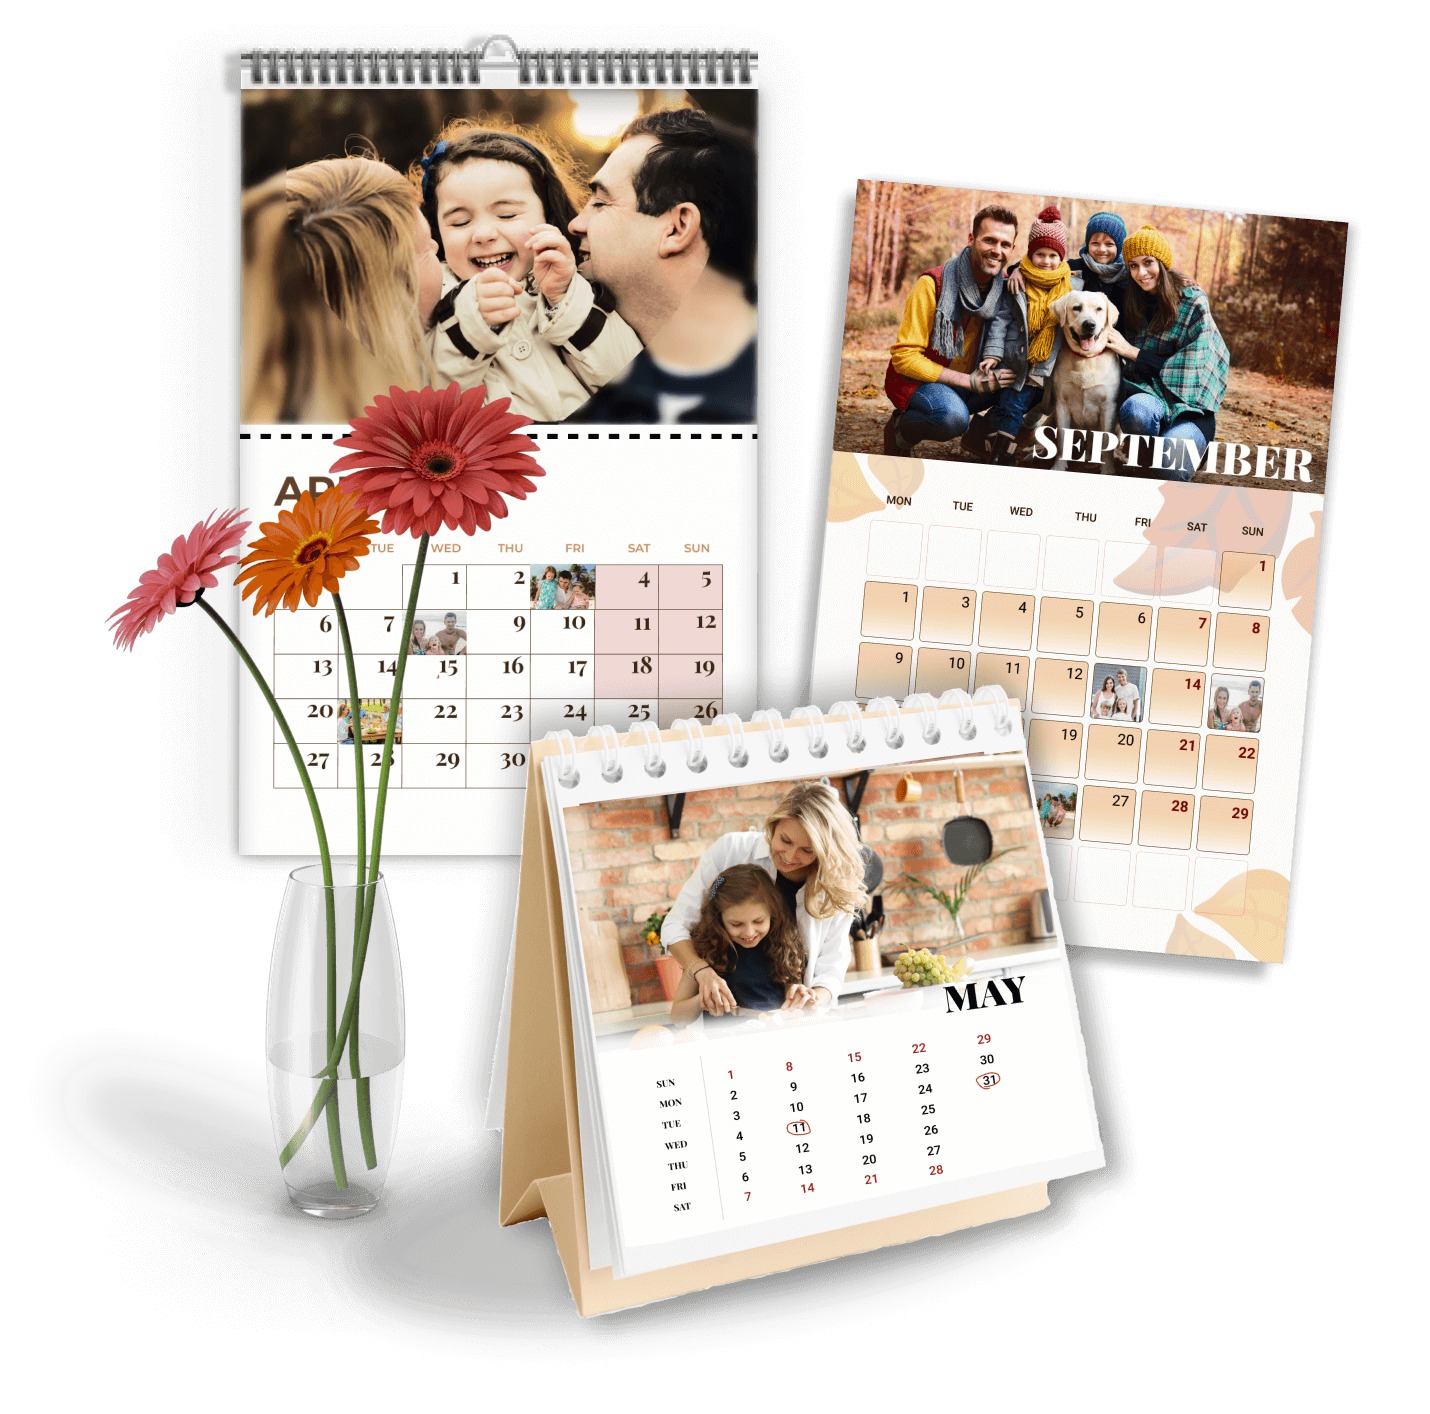 Want to design your own calendar?